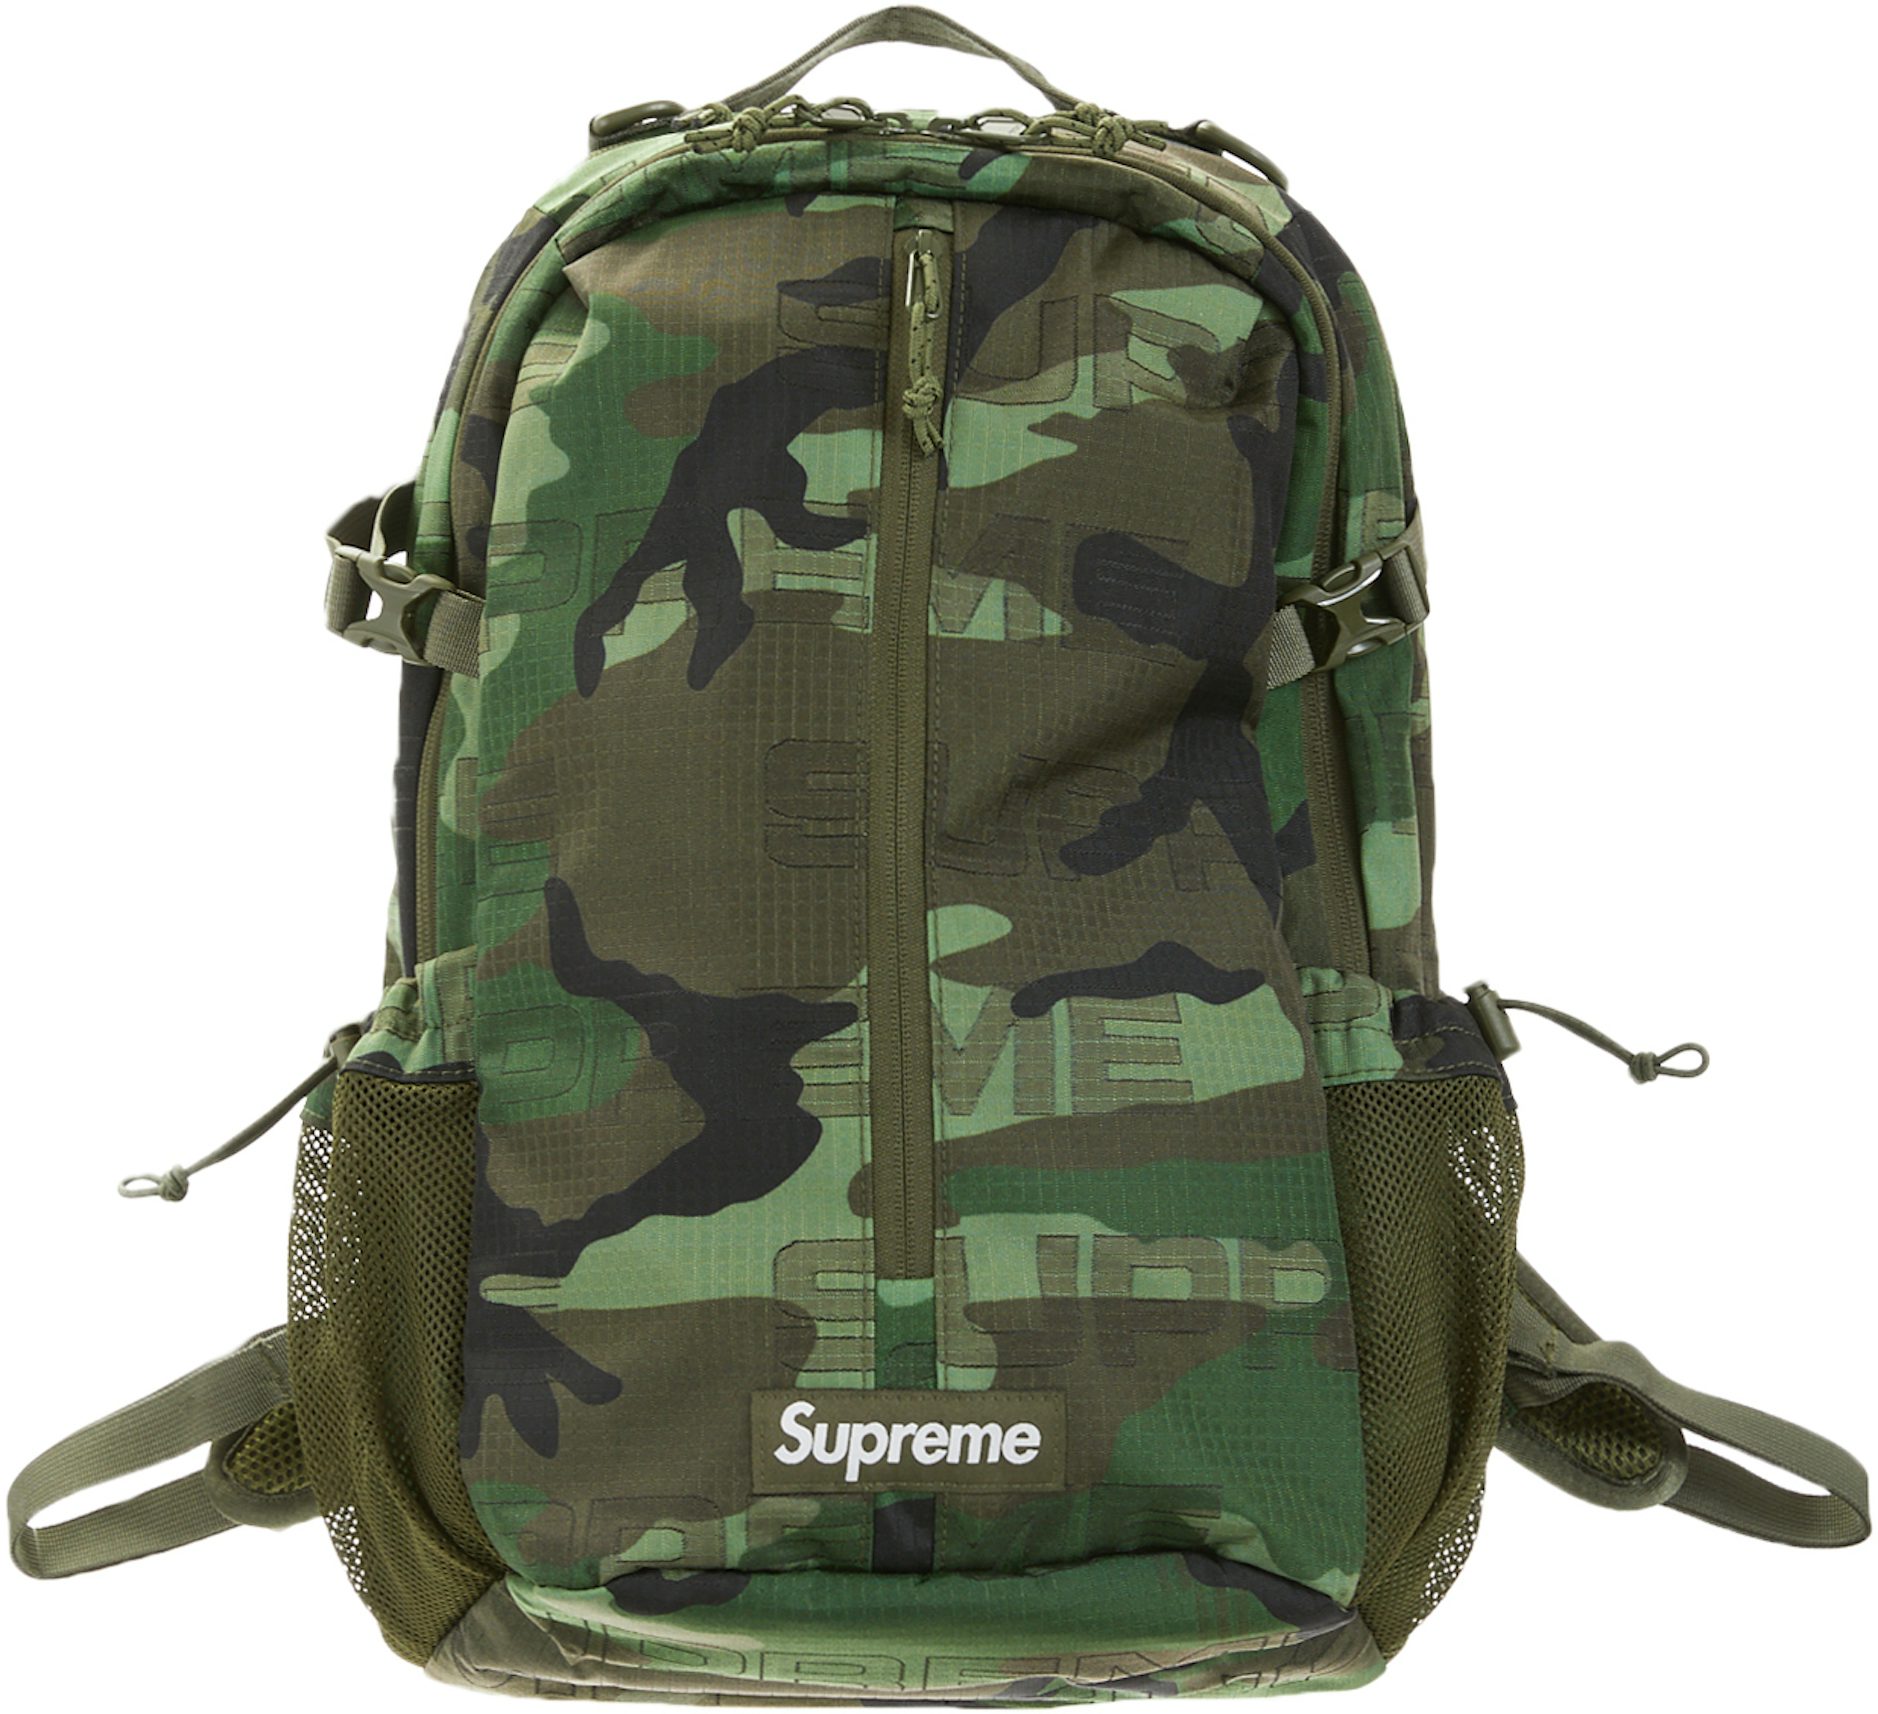 Supreme FW19 Real Tree Backpack: full review 